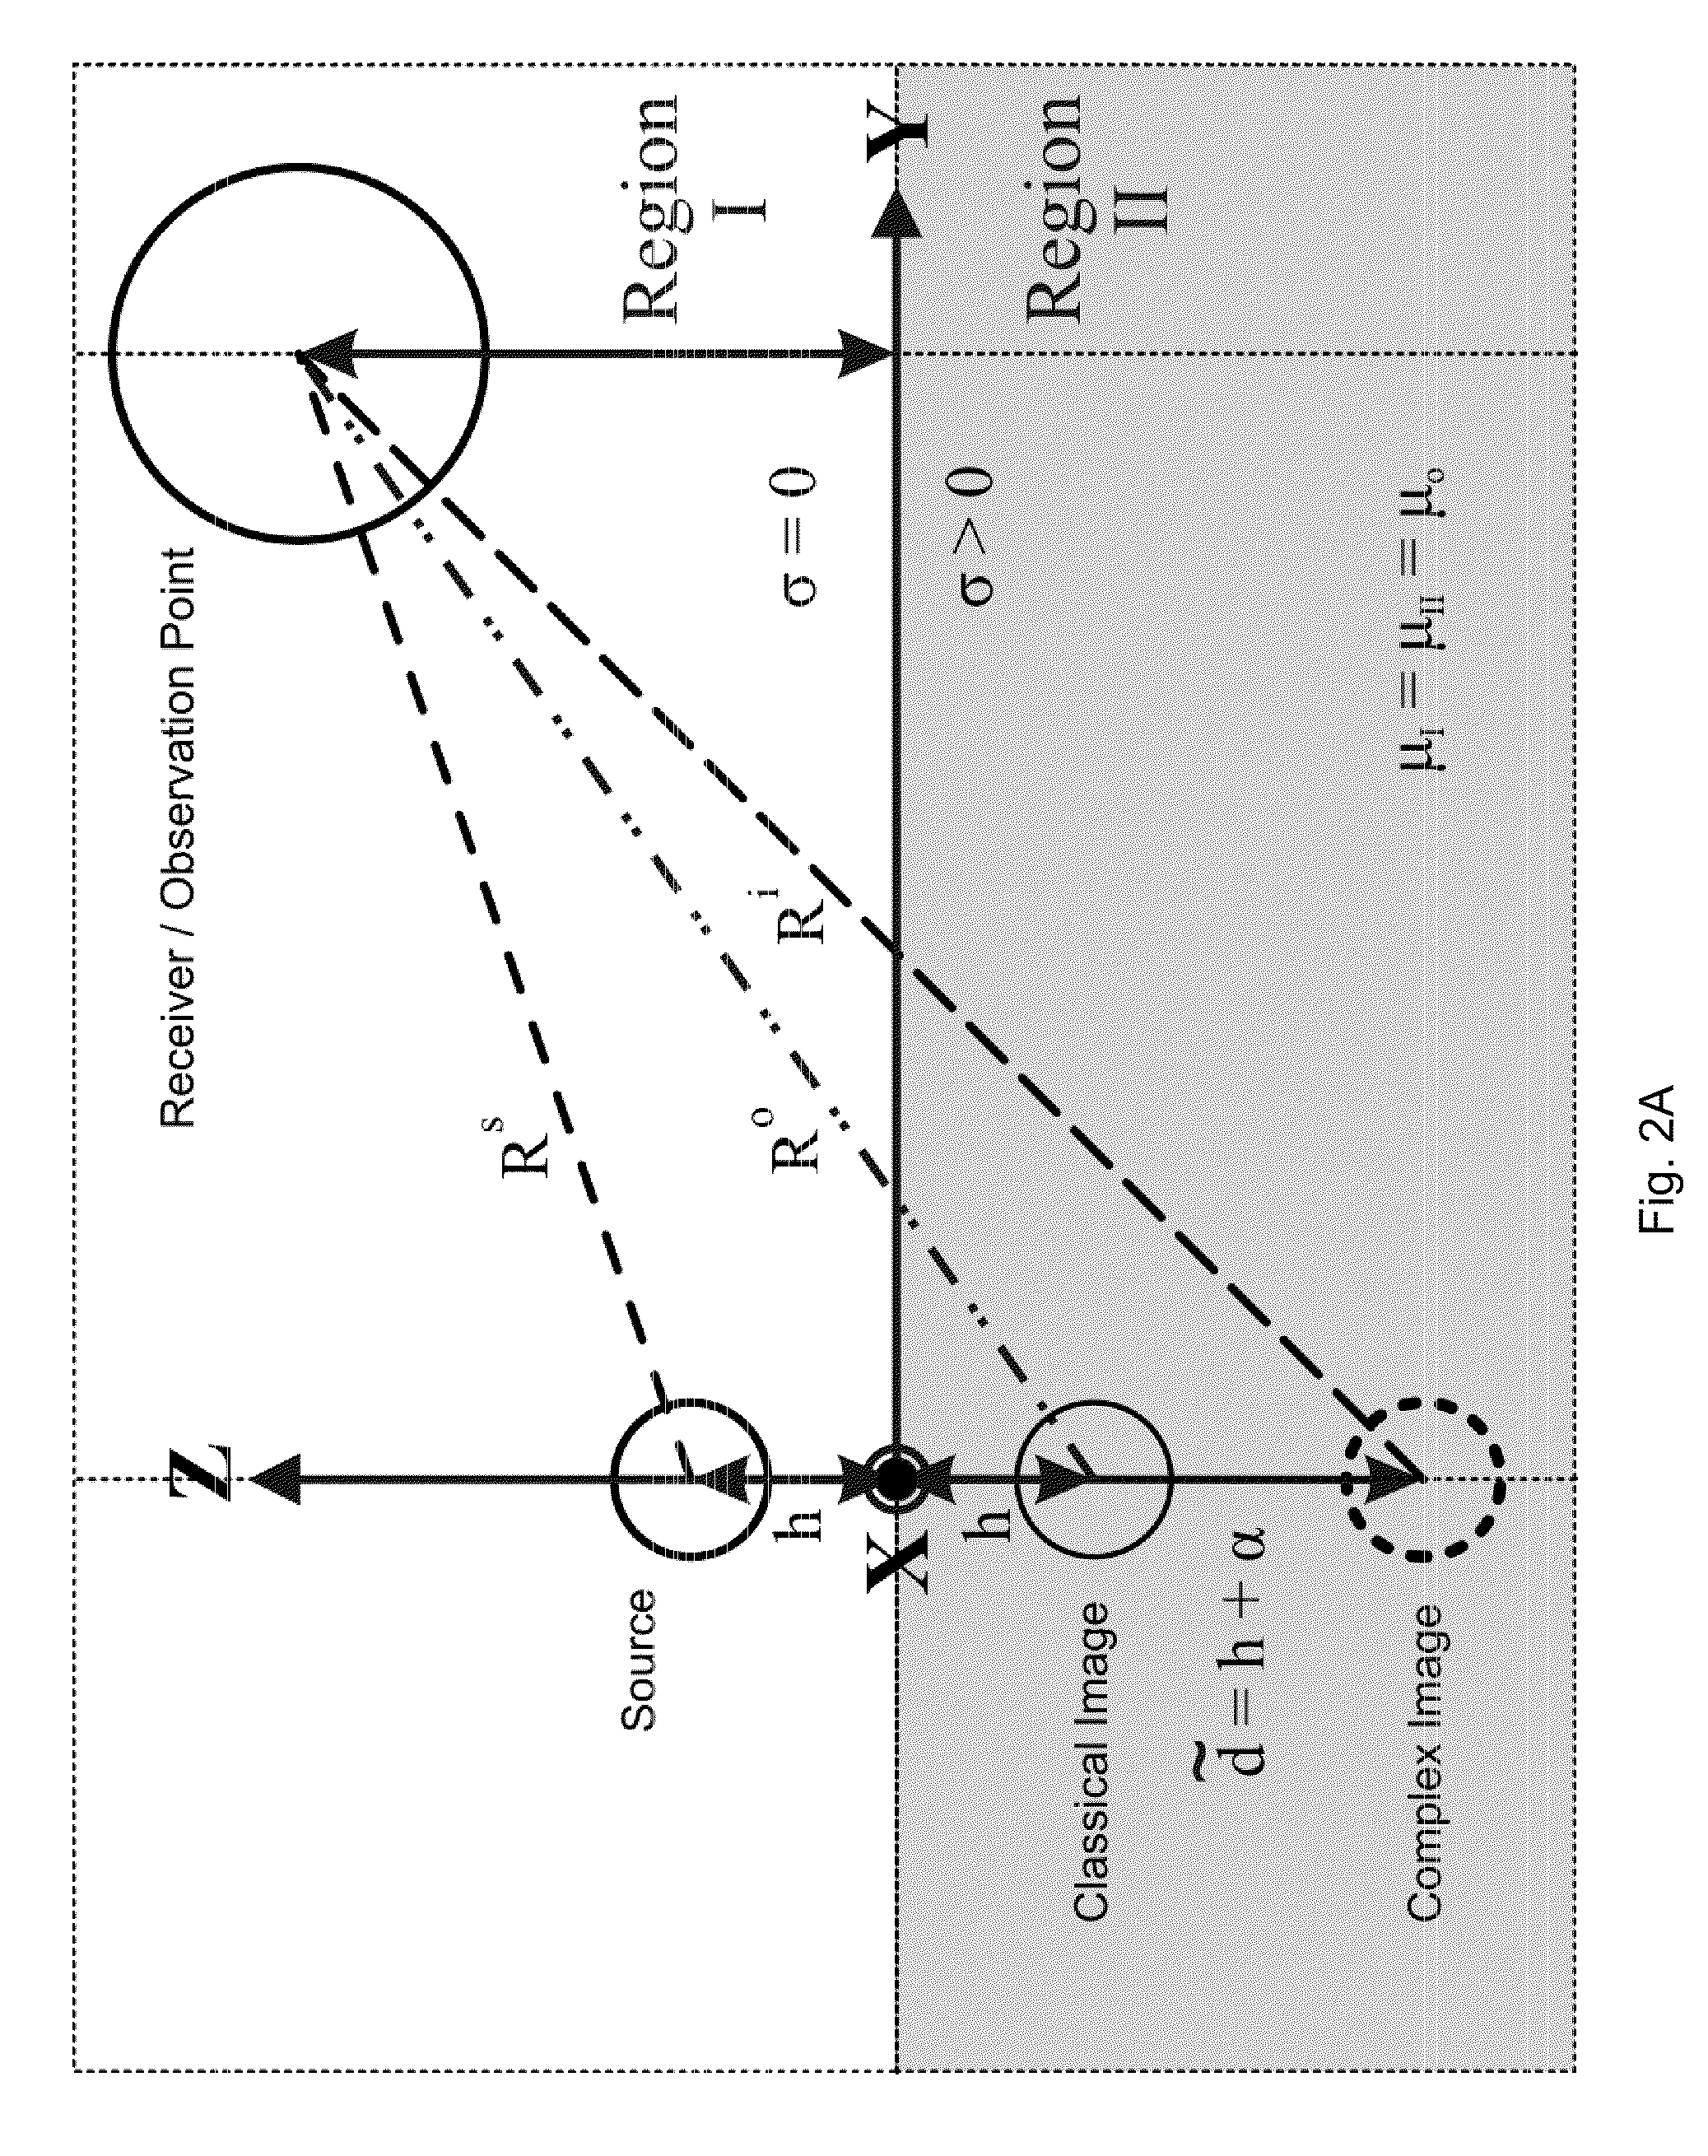 Systems and Methods for Position Tracking Using Magnetoquasistatic Fields